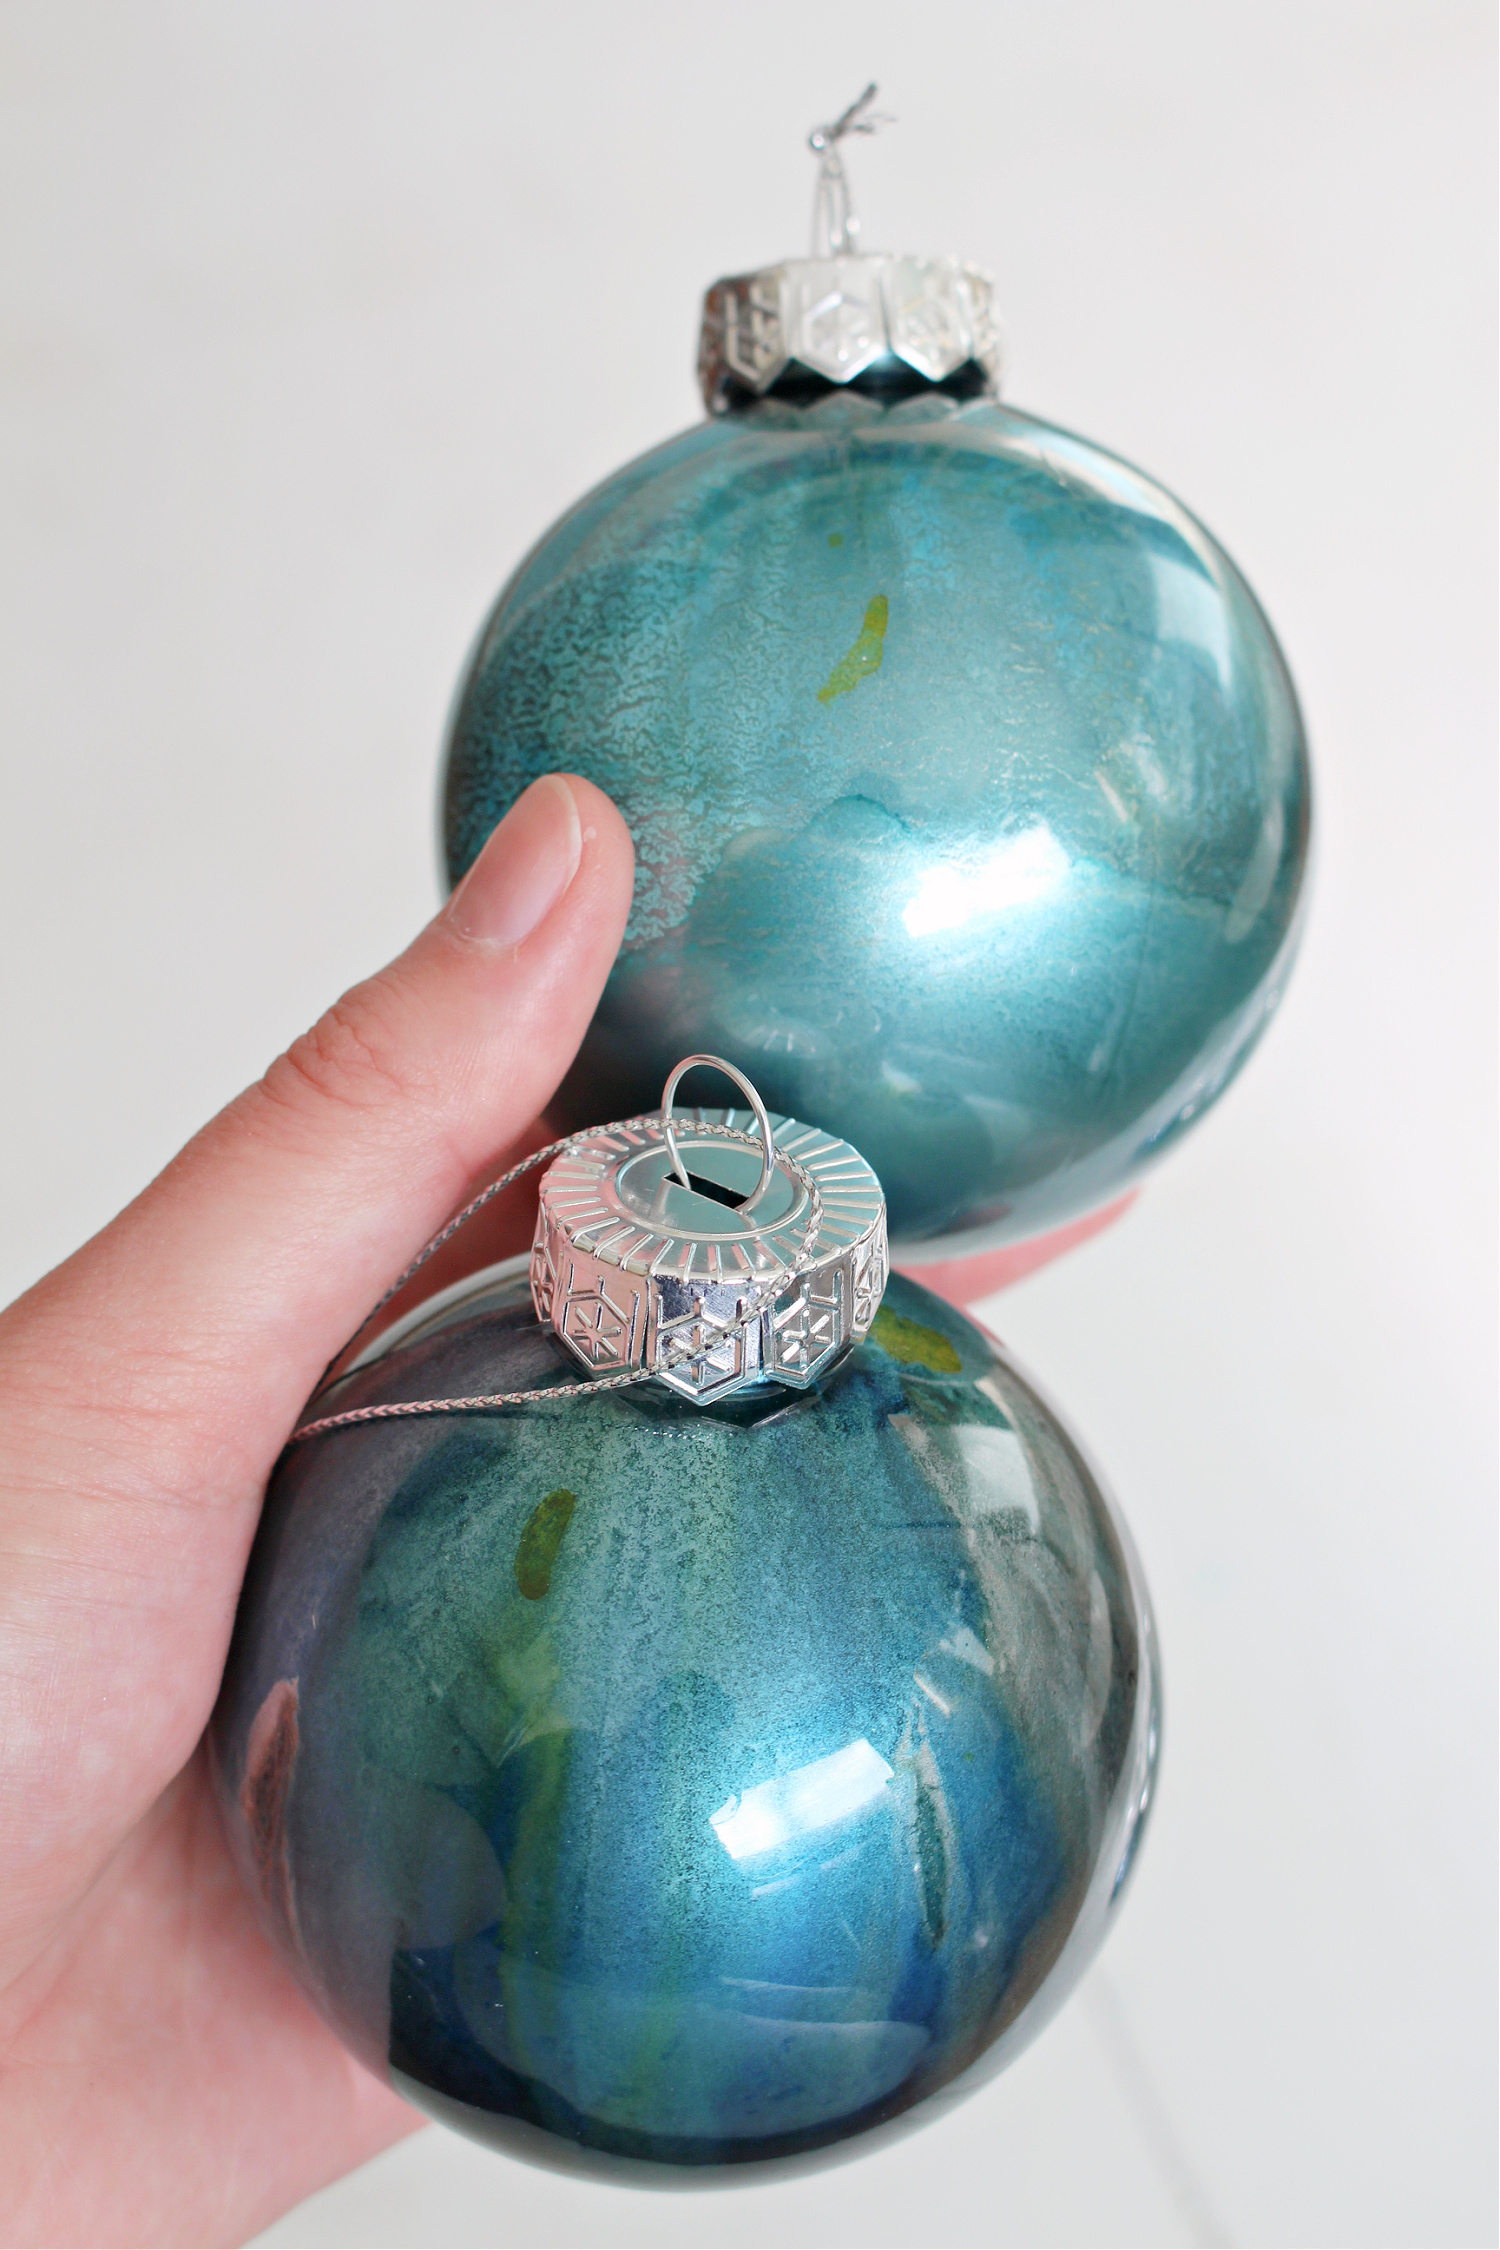 Can You Use Alcohol Ink on Plastic Ornaments? YES!